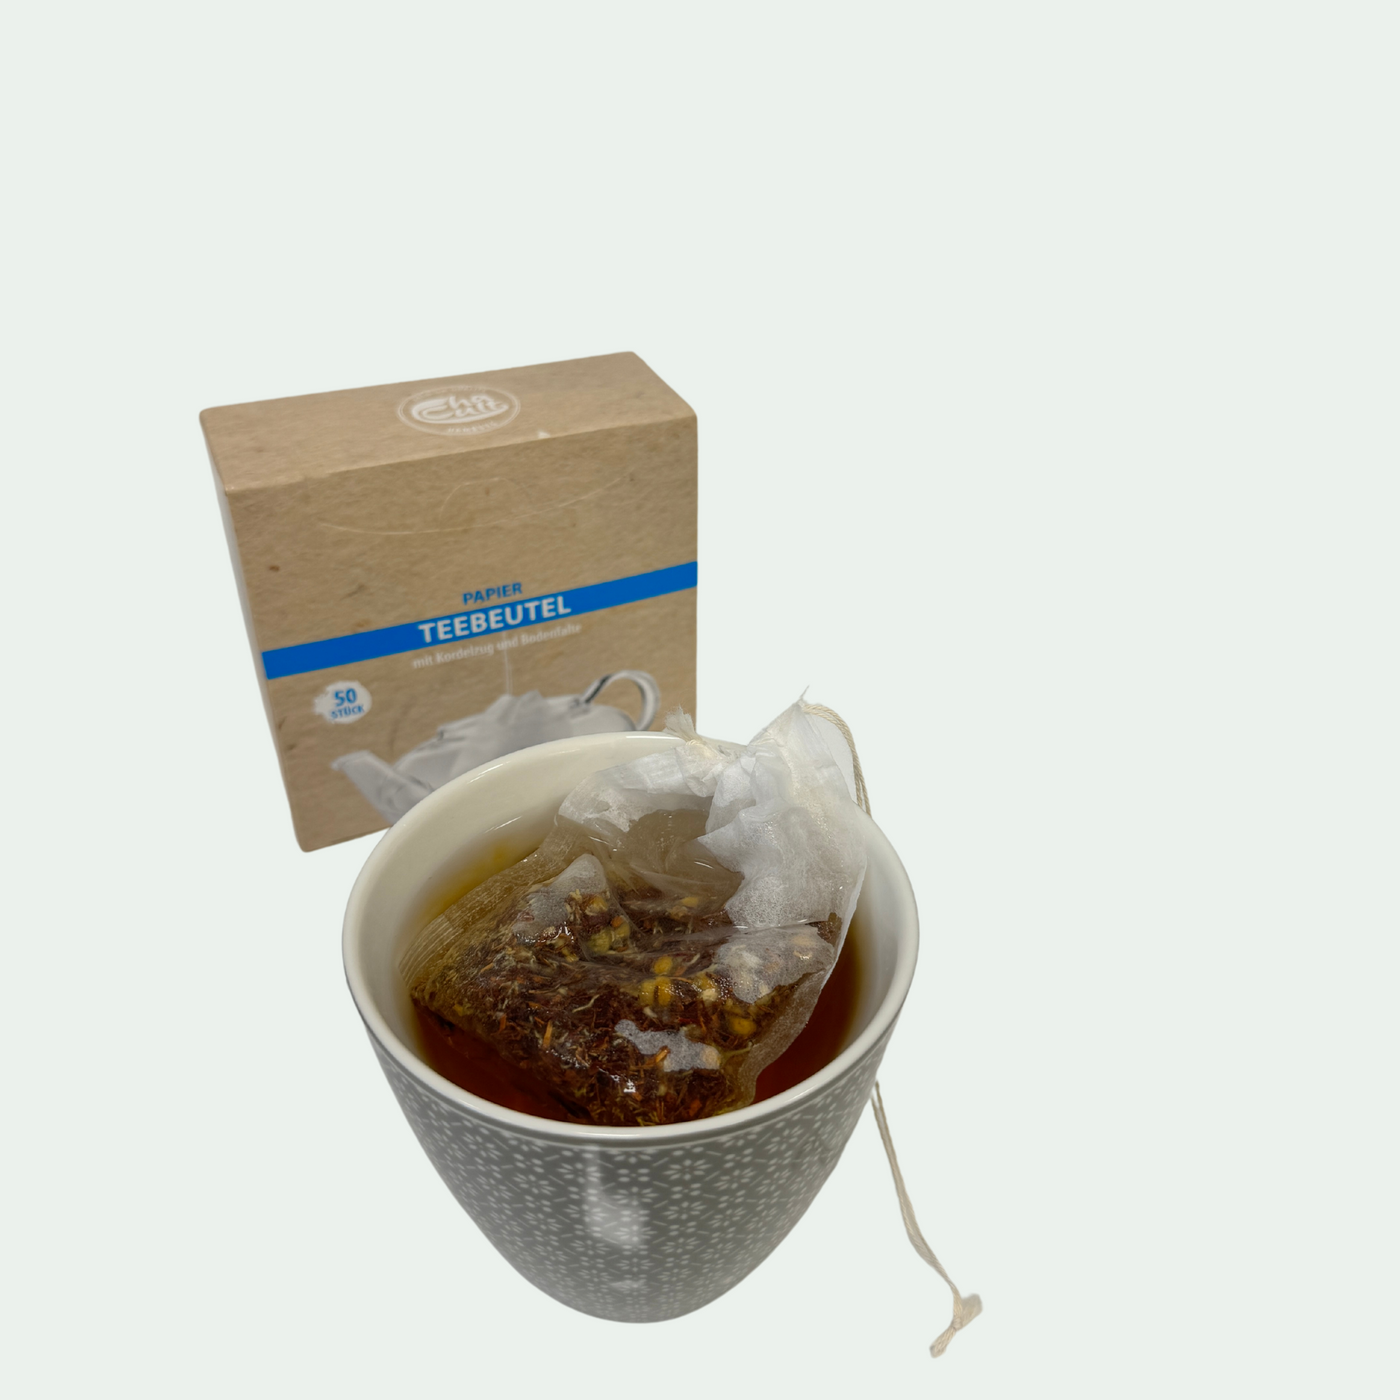 Paper Tea Filter with Drawstring